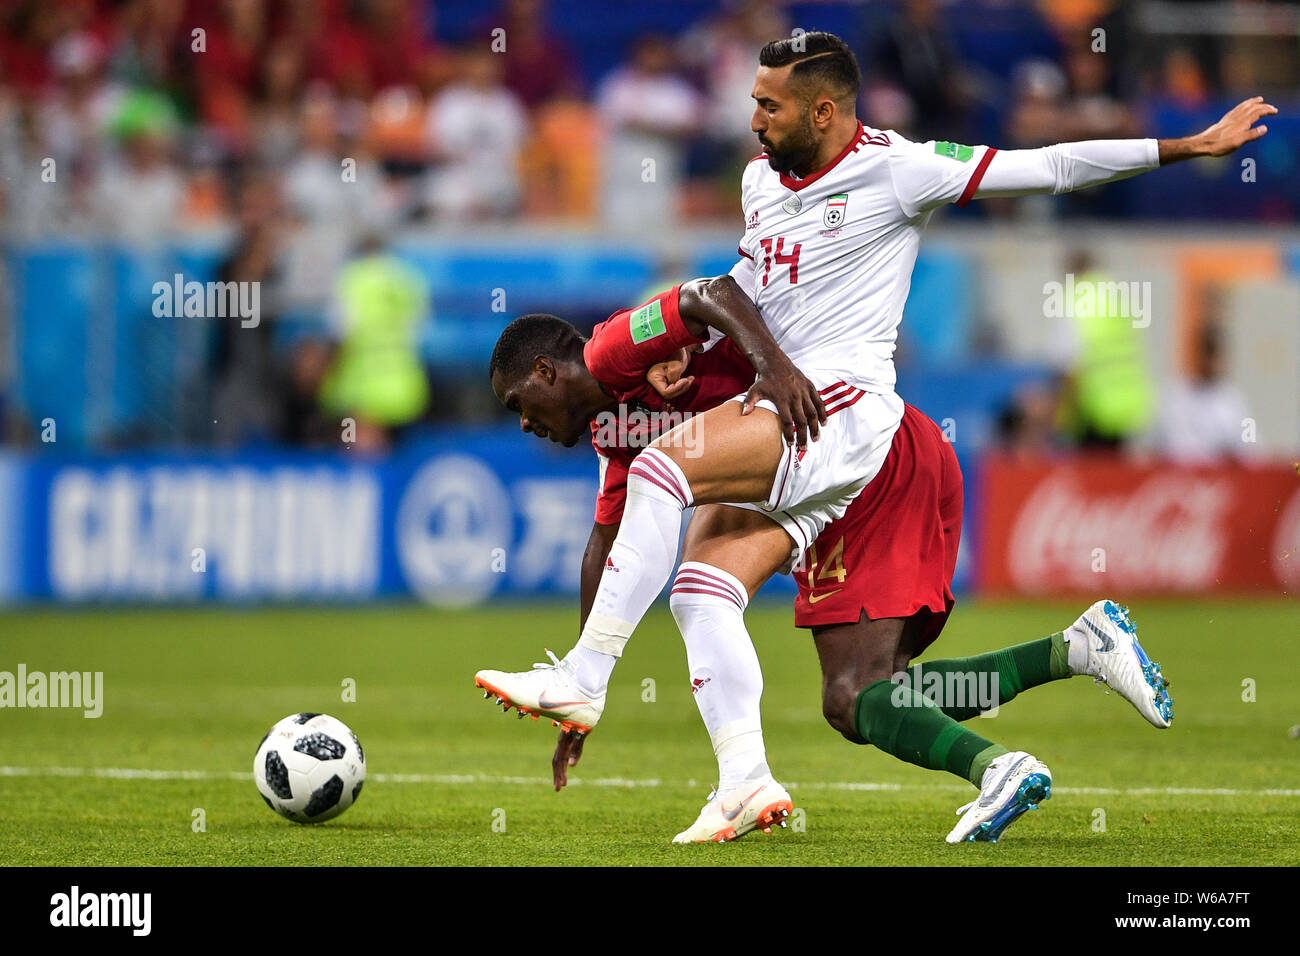 William Carvalho of Portugal, back, challenges Saman Ghoddos of Iran in their Group B match during the 2018 FIFA World Cup in Saransk, Russia, 25 June Stock Photo